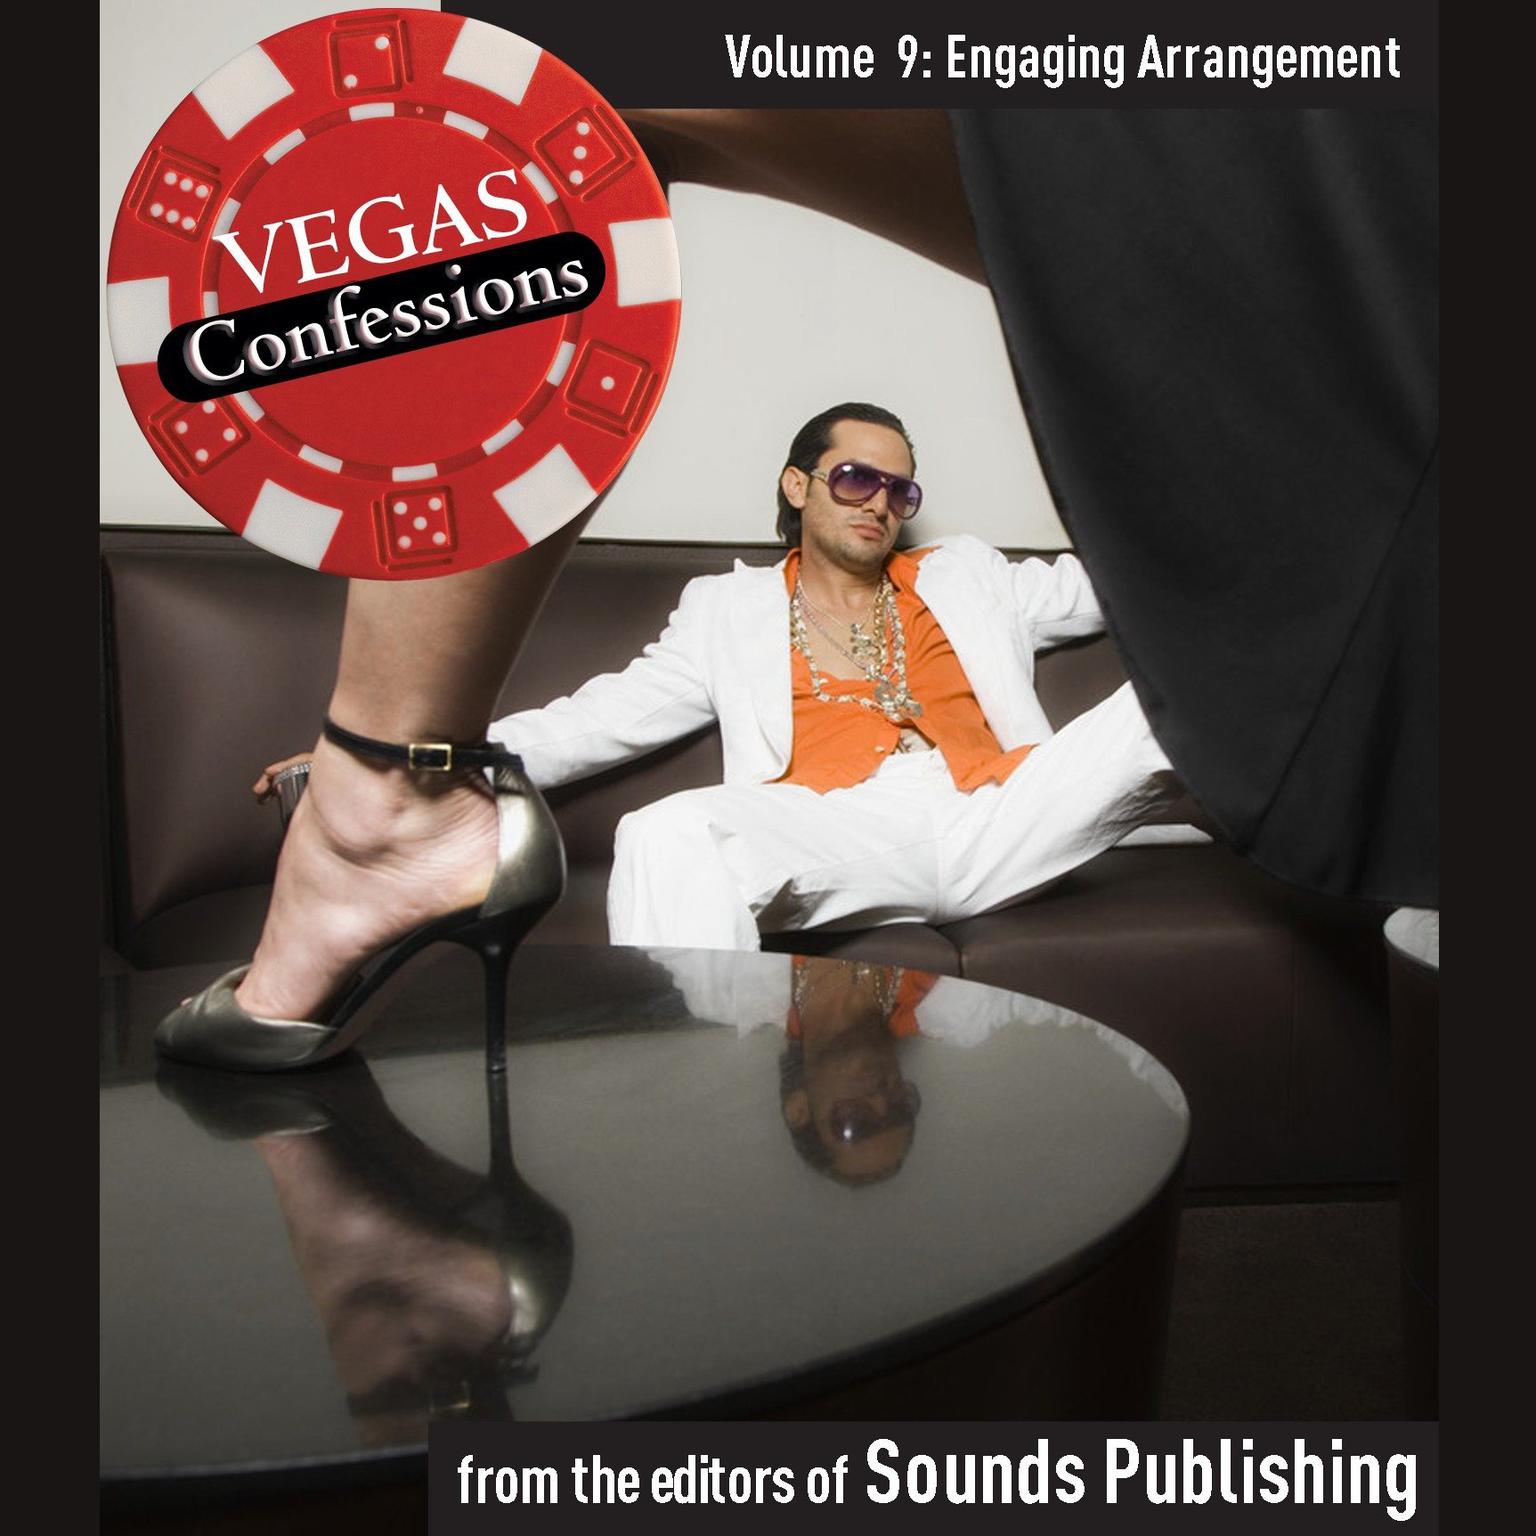 Vegas Confessions 9: Engaging Arrangement Audiobook, by The Editors of Sounds Publishing